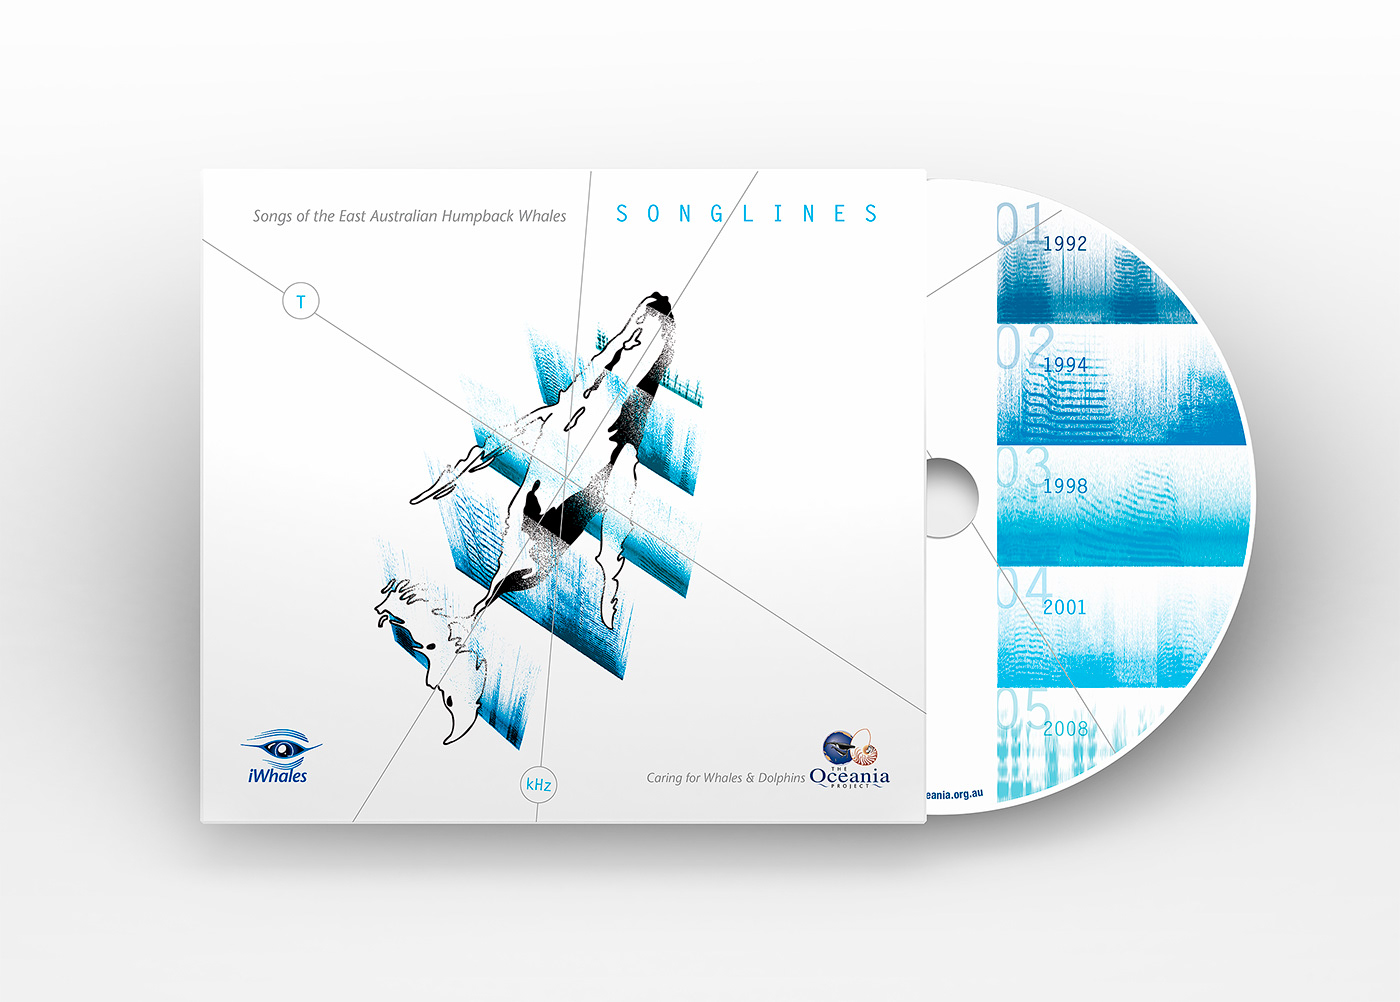 Cover and CD showing the progression of the Whale song over five different years.